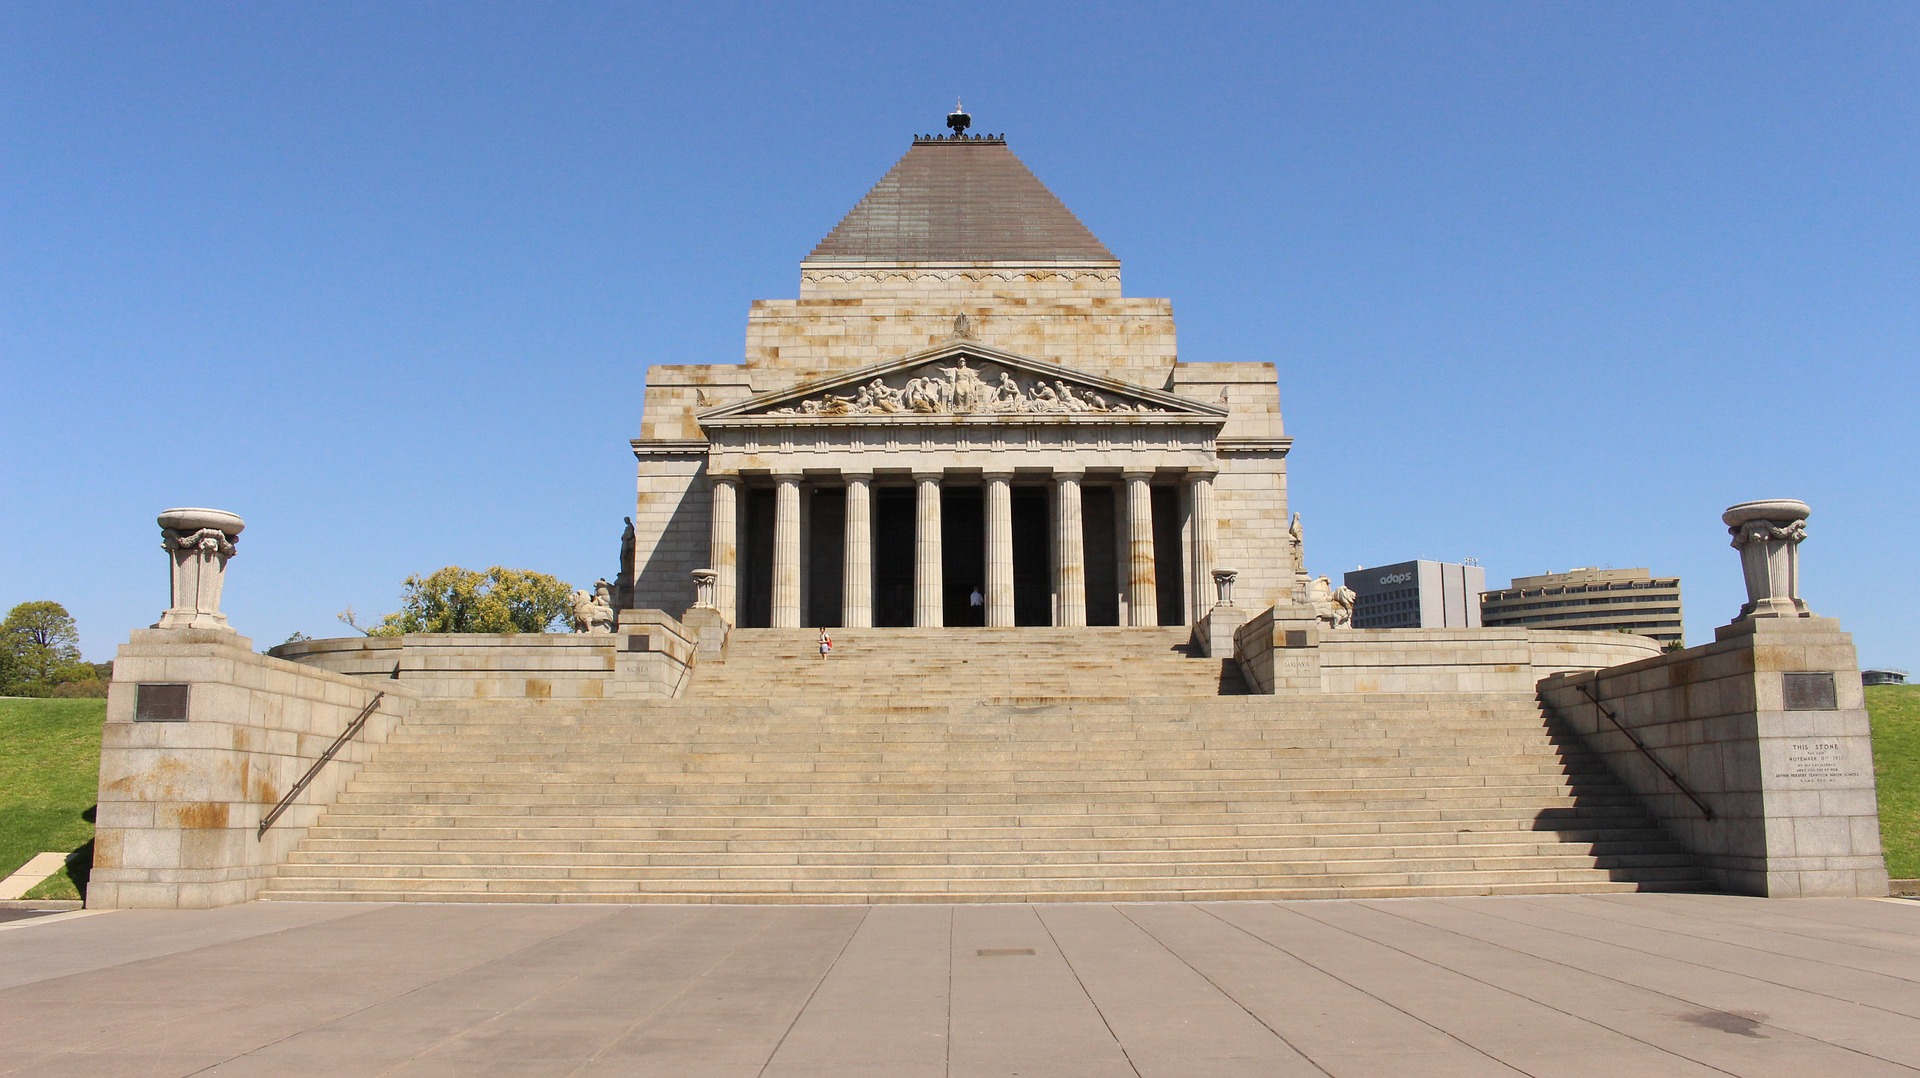 An image of the Shrine of Rememberance